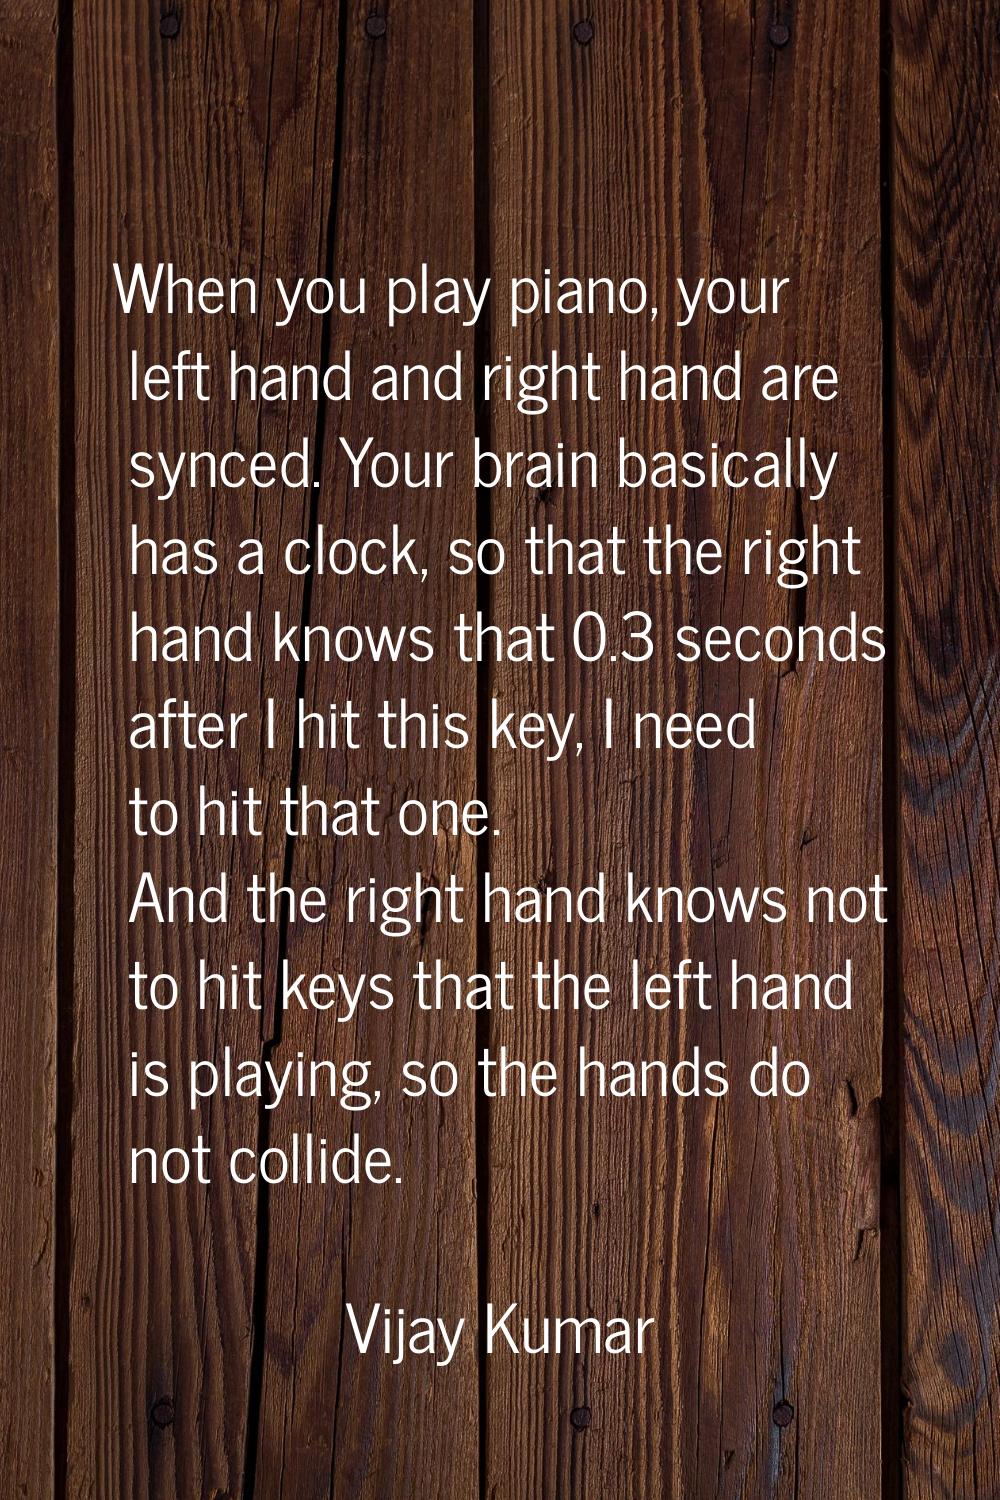 When you play piano, your left hand and right hand are synced. Your brain basically has a clock, so